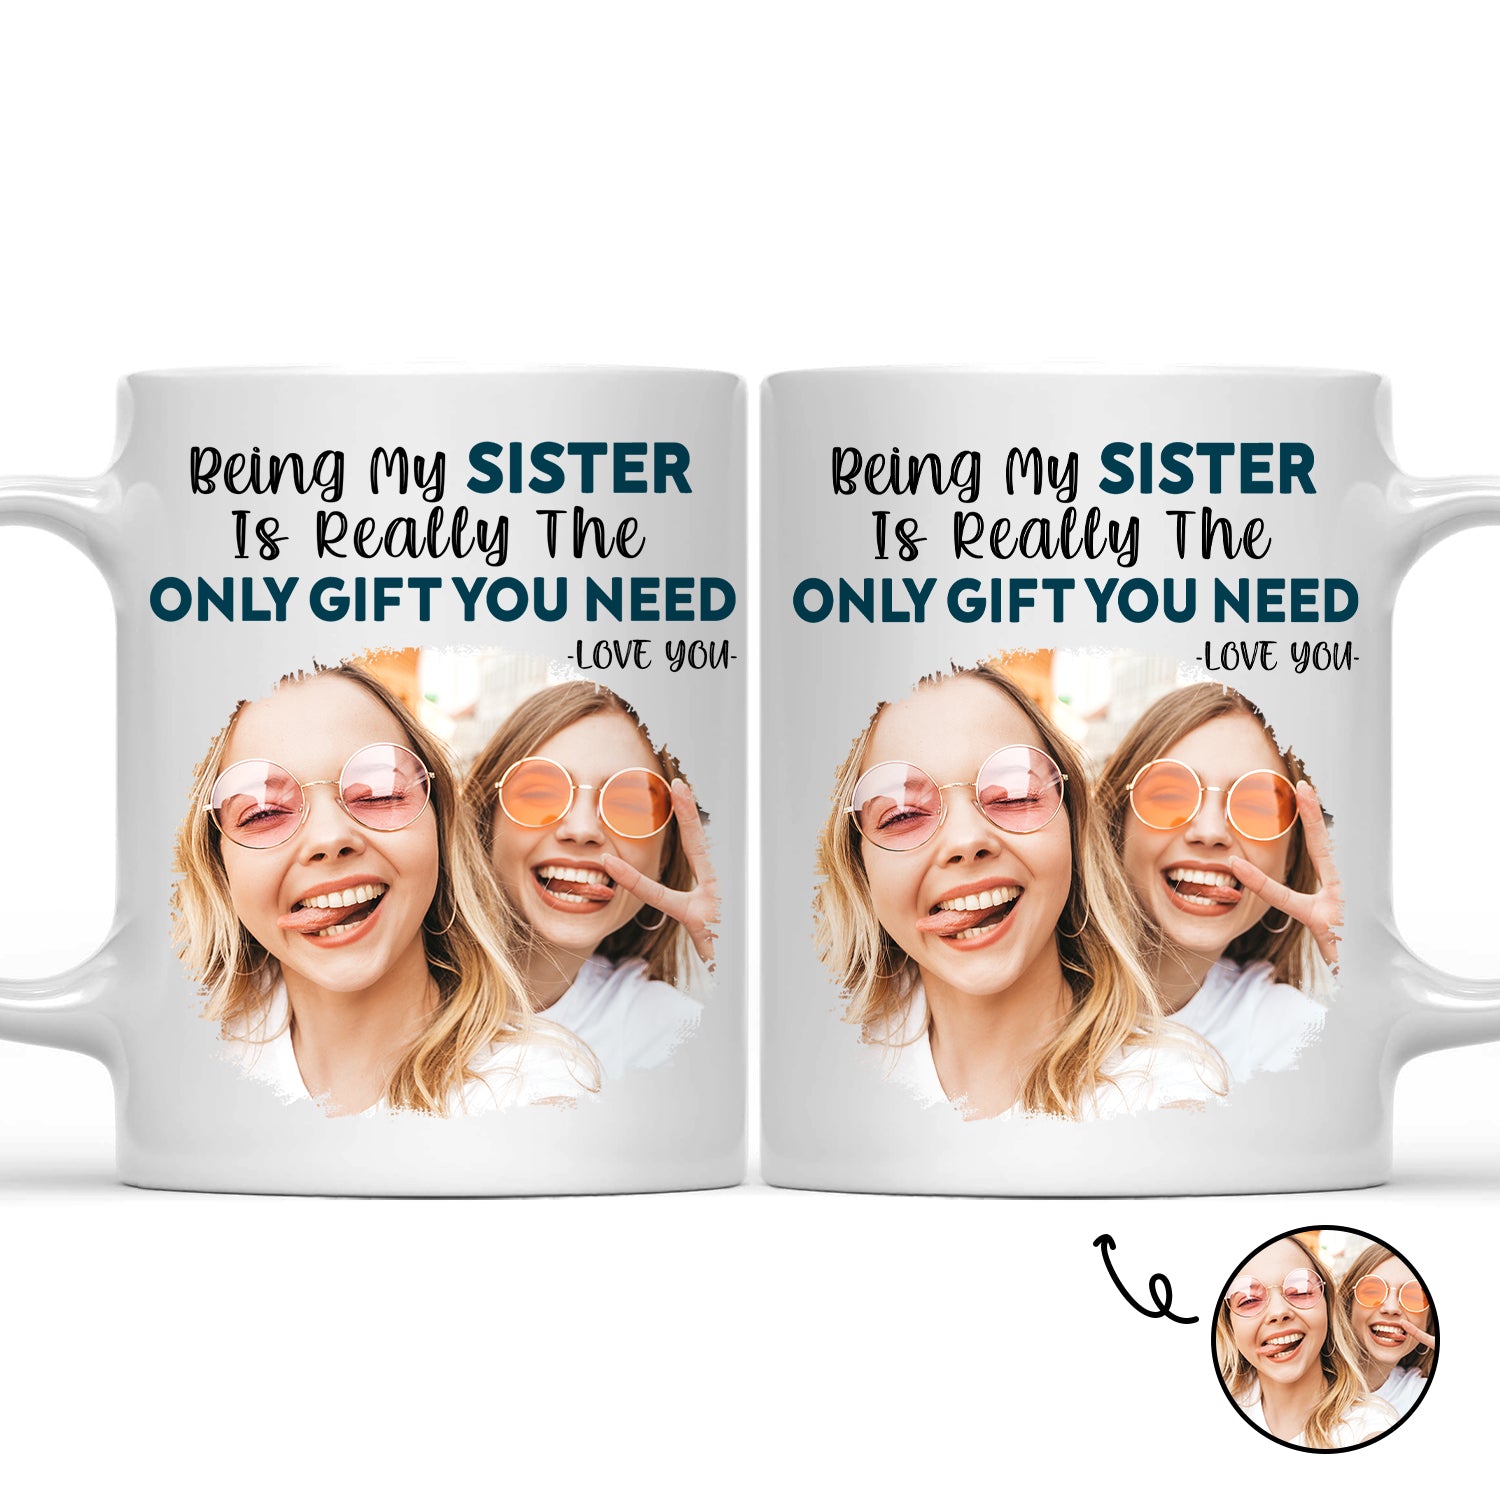 Custom Photo The Only Gift You Need - Gift For Sister, Brother, Dad, Mom, Couple, Family - Personalized Mug